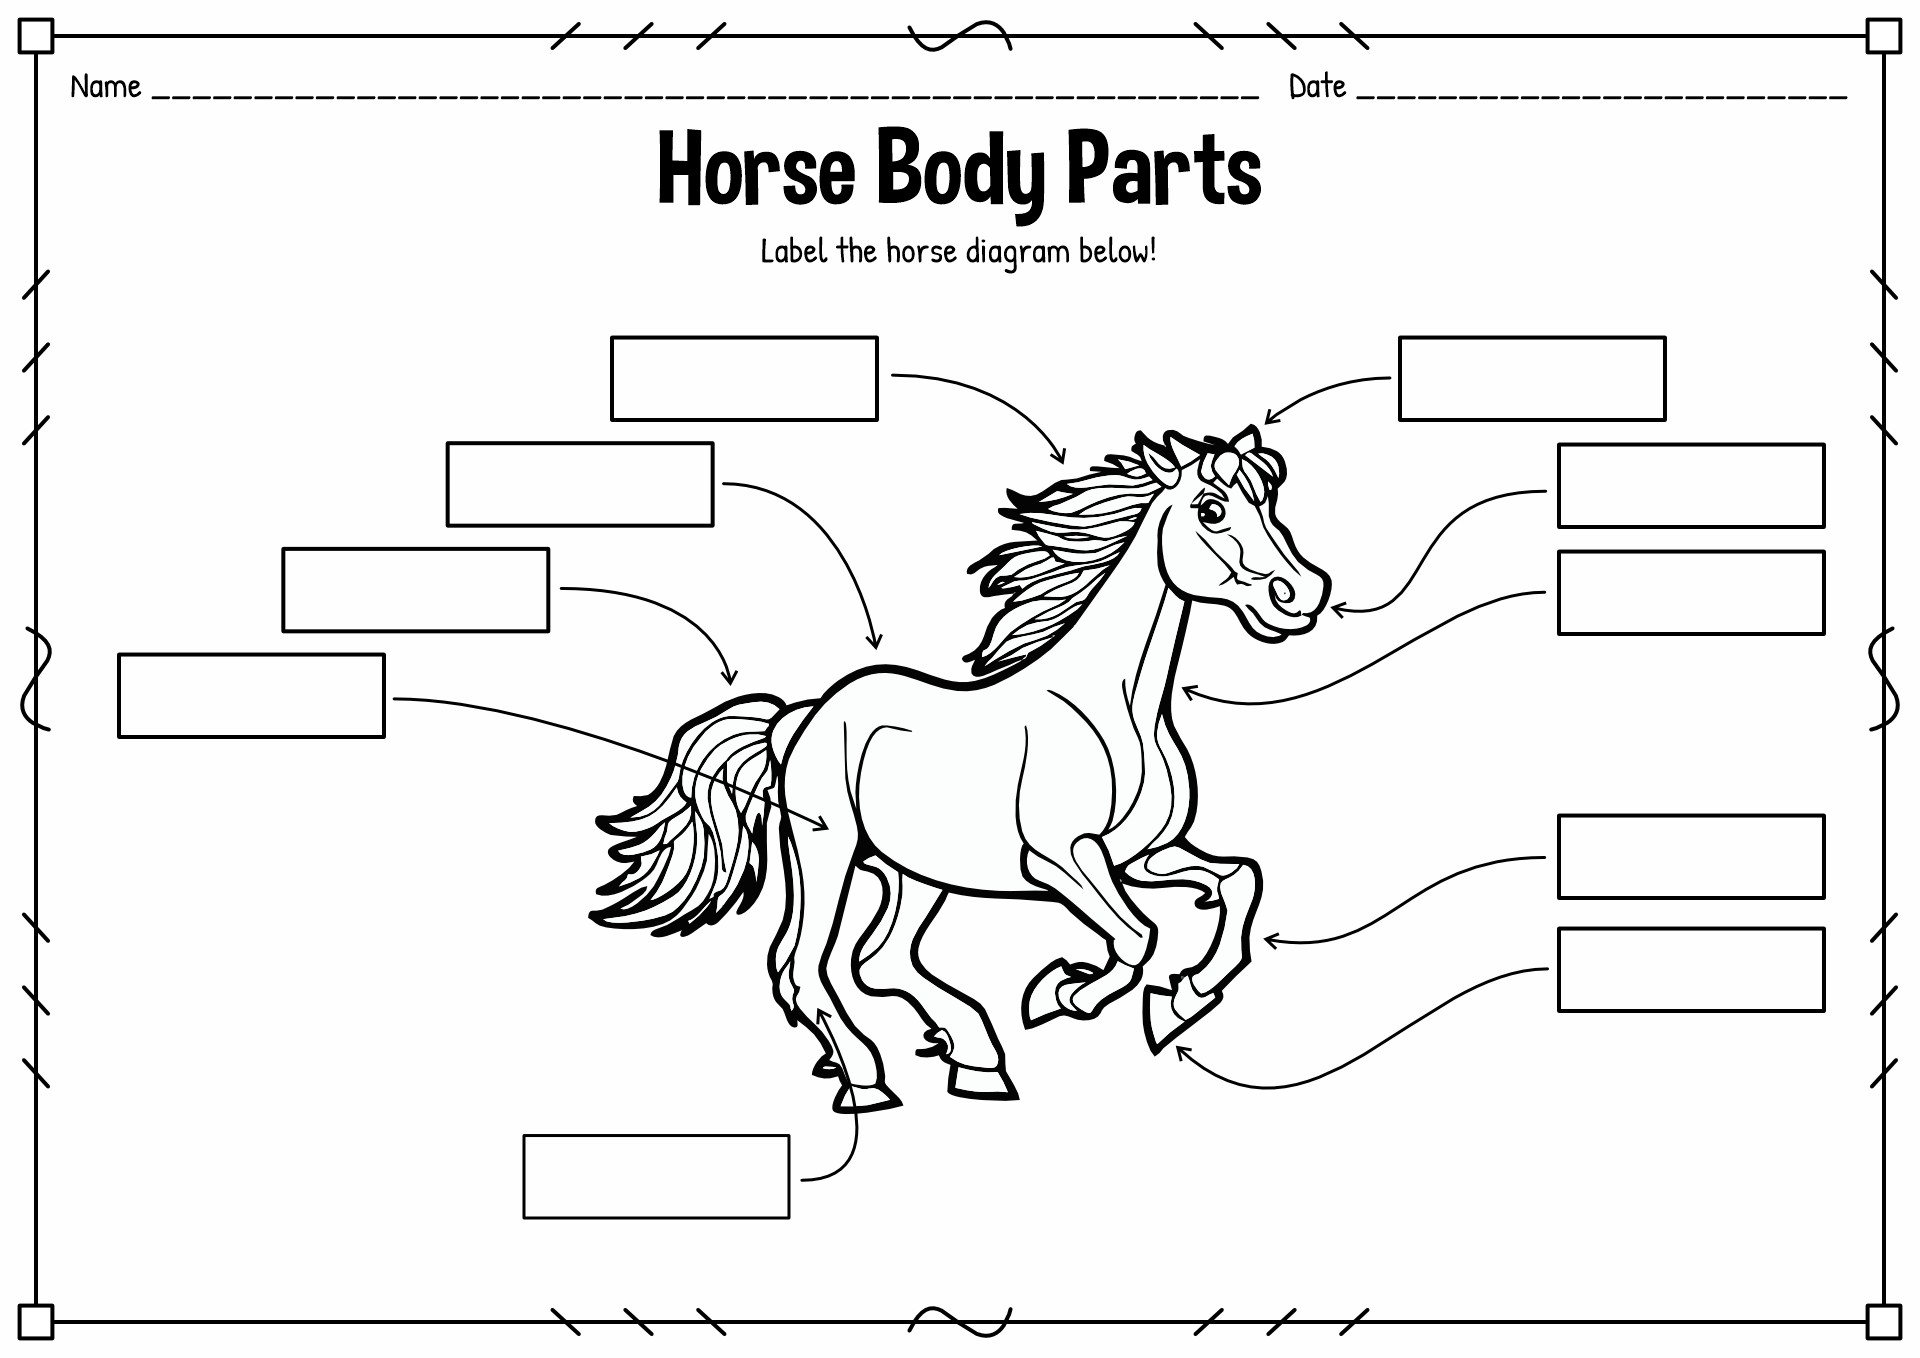 Blank Diagram of a Horse Body Parts